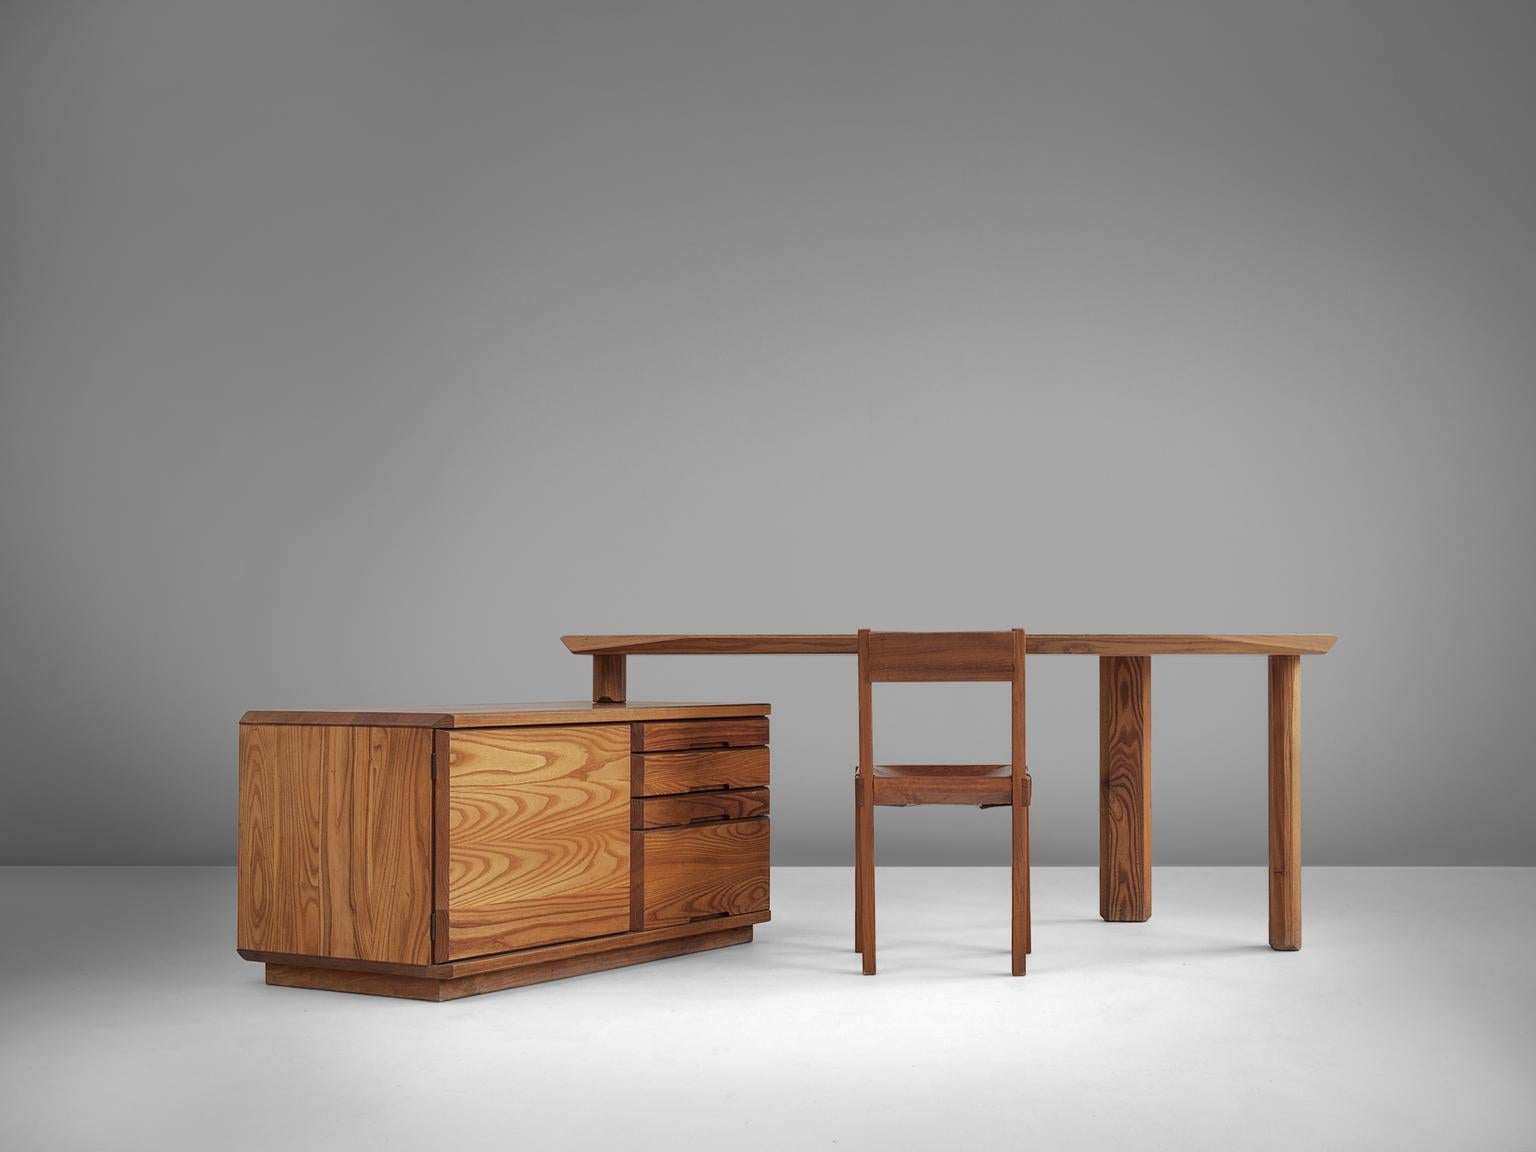 Pierre Chapo, adjustable desk B40, elm, France, 1960s.

Characteristic desk by French designer and carpenter Pierre Chapo. Eye-catching detail is the beautiful and expressive grain of the elmwood, visible on the entire item. Stunning polygonal